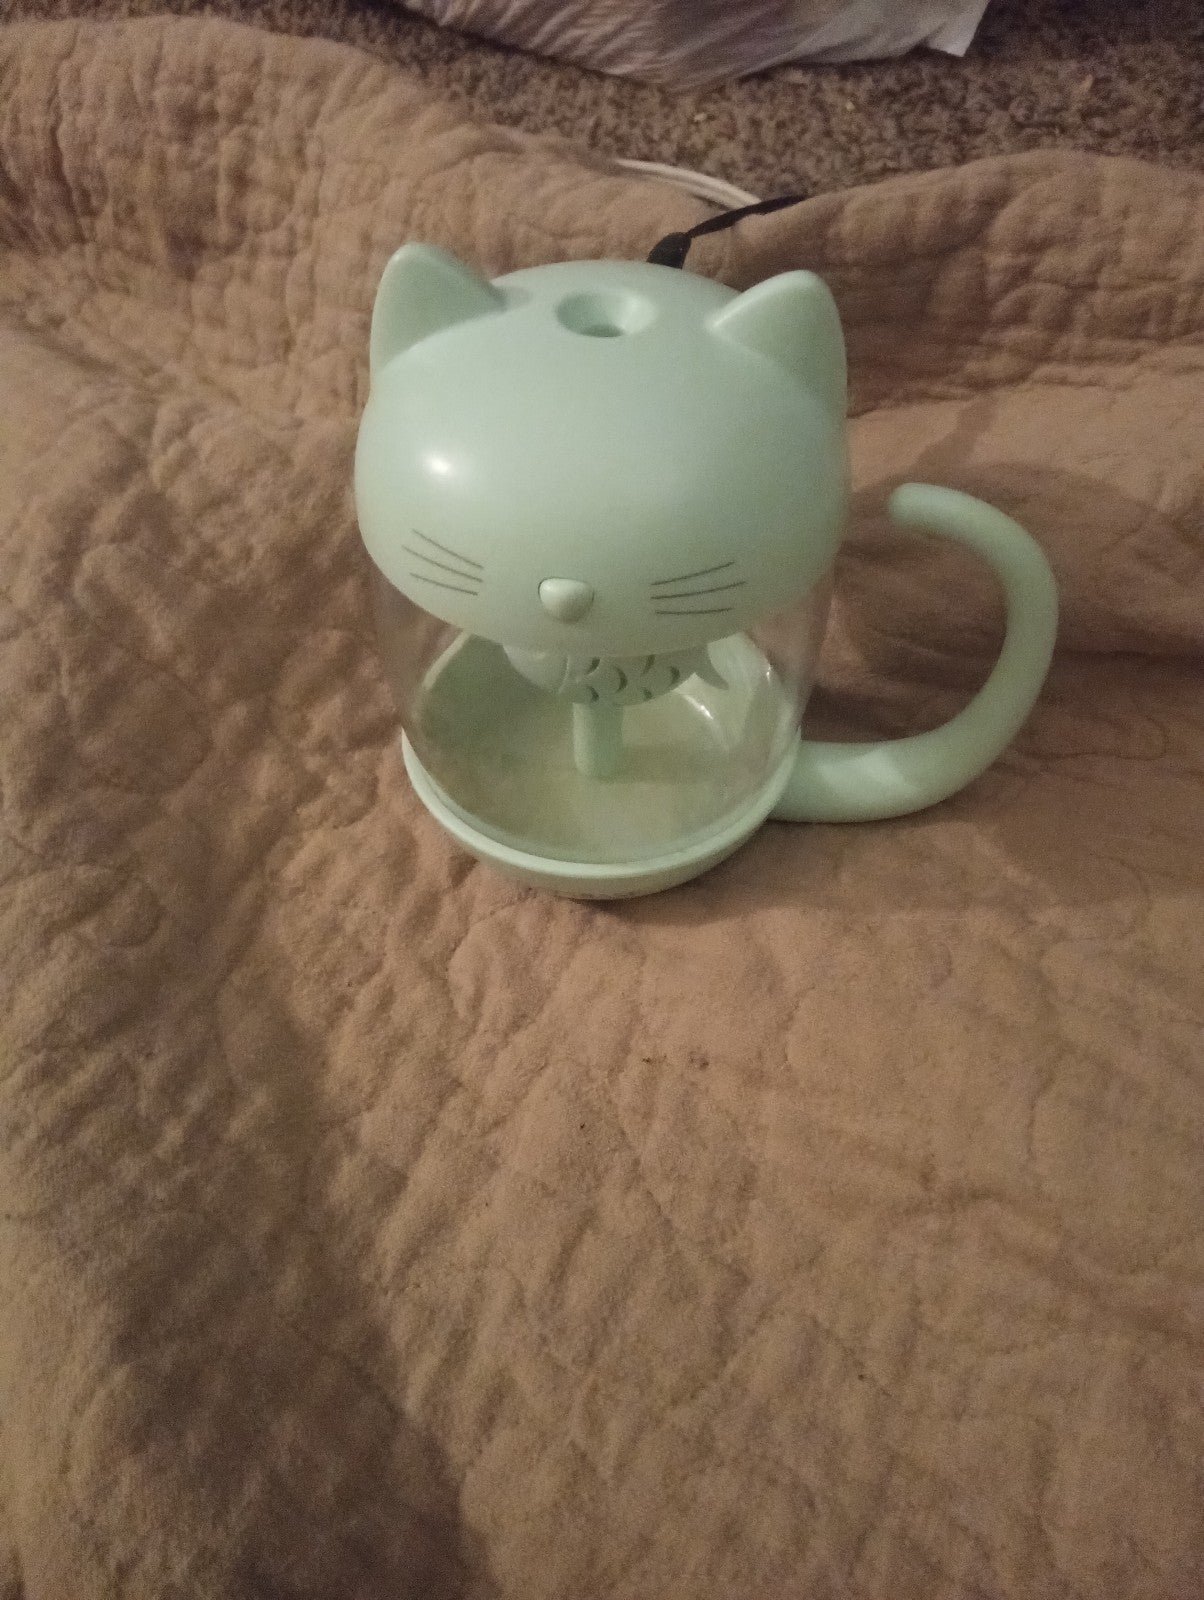 Cat teacup color changing light humidifier Q4zDsdCGX